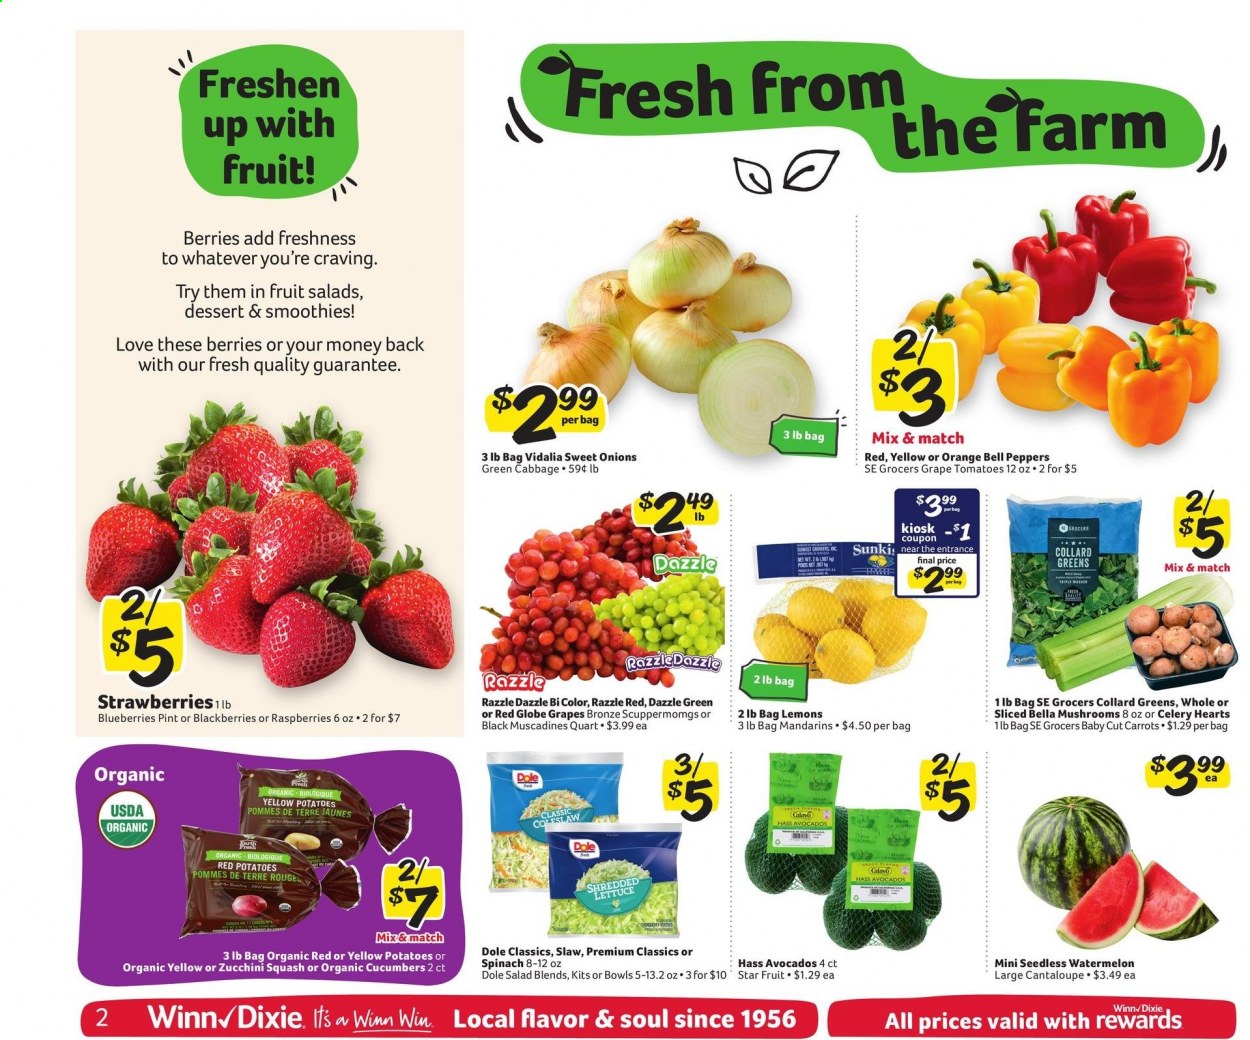 thumbnail - Winn Dixie Flyer - 08/25/2021 - 08/31/2021 - Sales products - mushrooms, star fruit, bell peppers, Bella, cabbage, cantaloupe, carrots, cucumber, collard greens, spinach, tomatoes, zucchini, potatoes, lettuce, salad, Dole, peppers, red potatoes, sleeved celery, shredded lettuce, avocado, blackberries, blueberries, mandarines, Red Globe, watermelon, oranges, smoothie, lemons. Page 2.